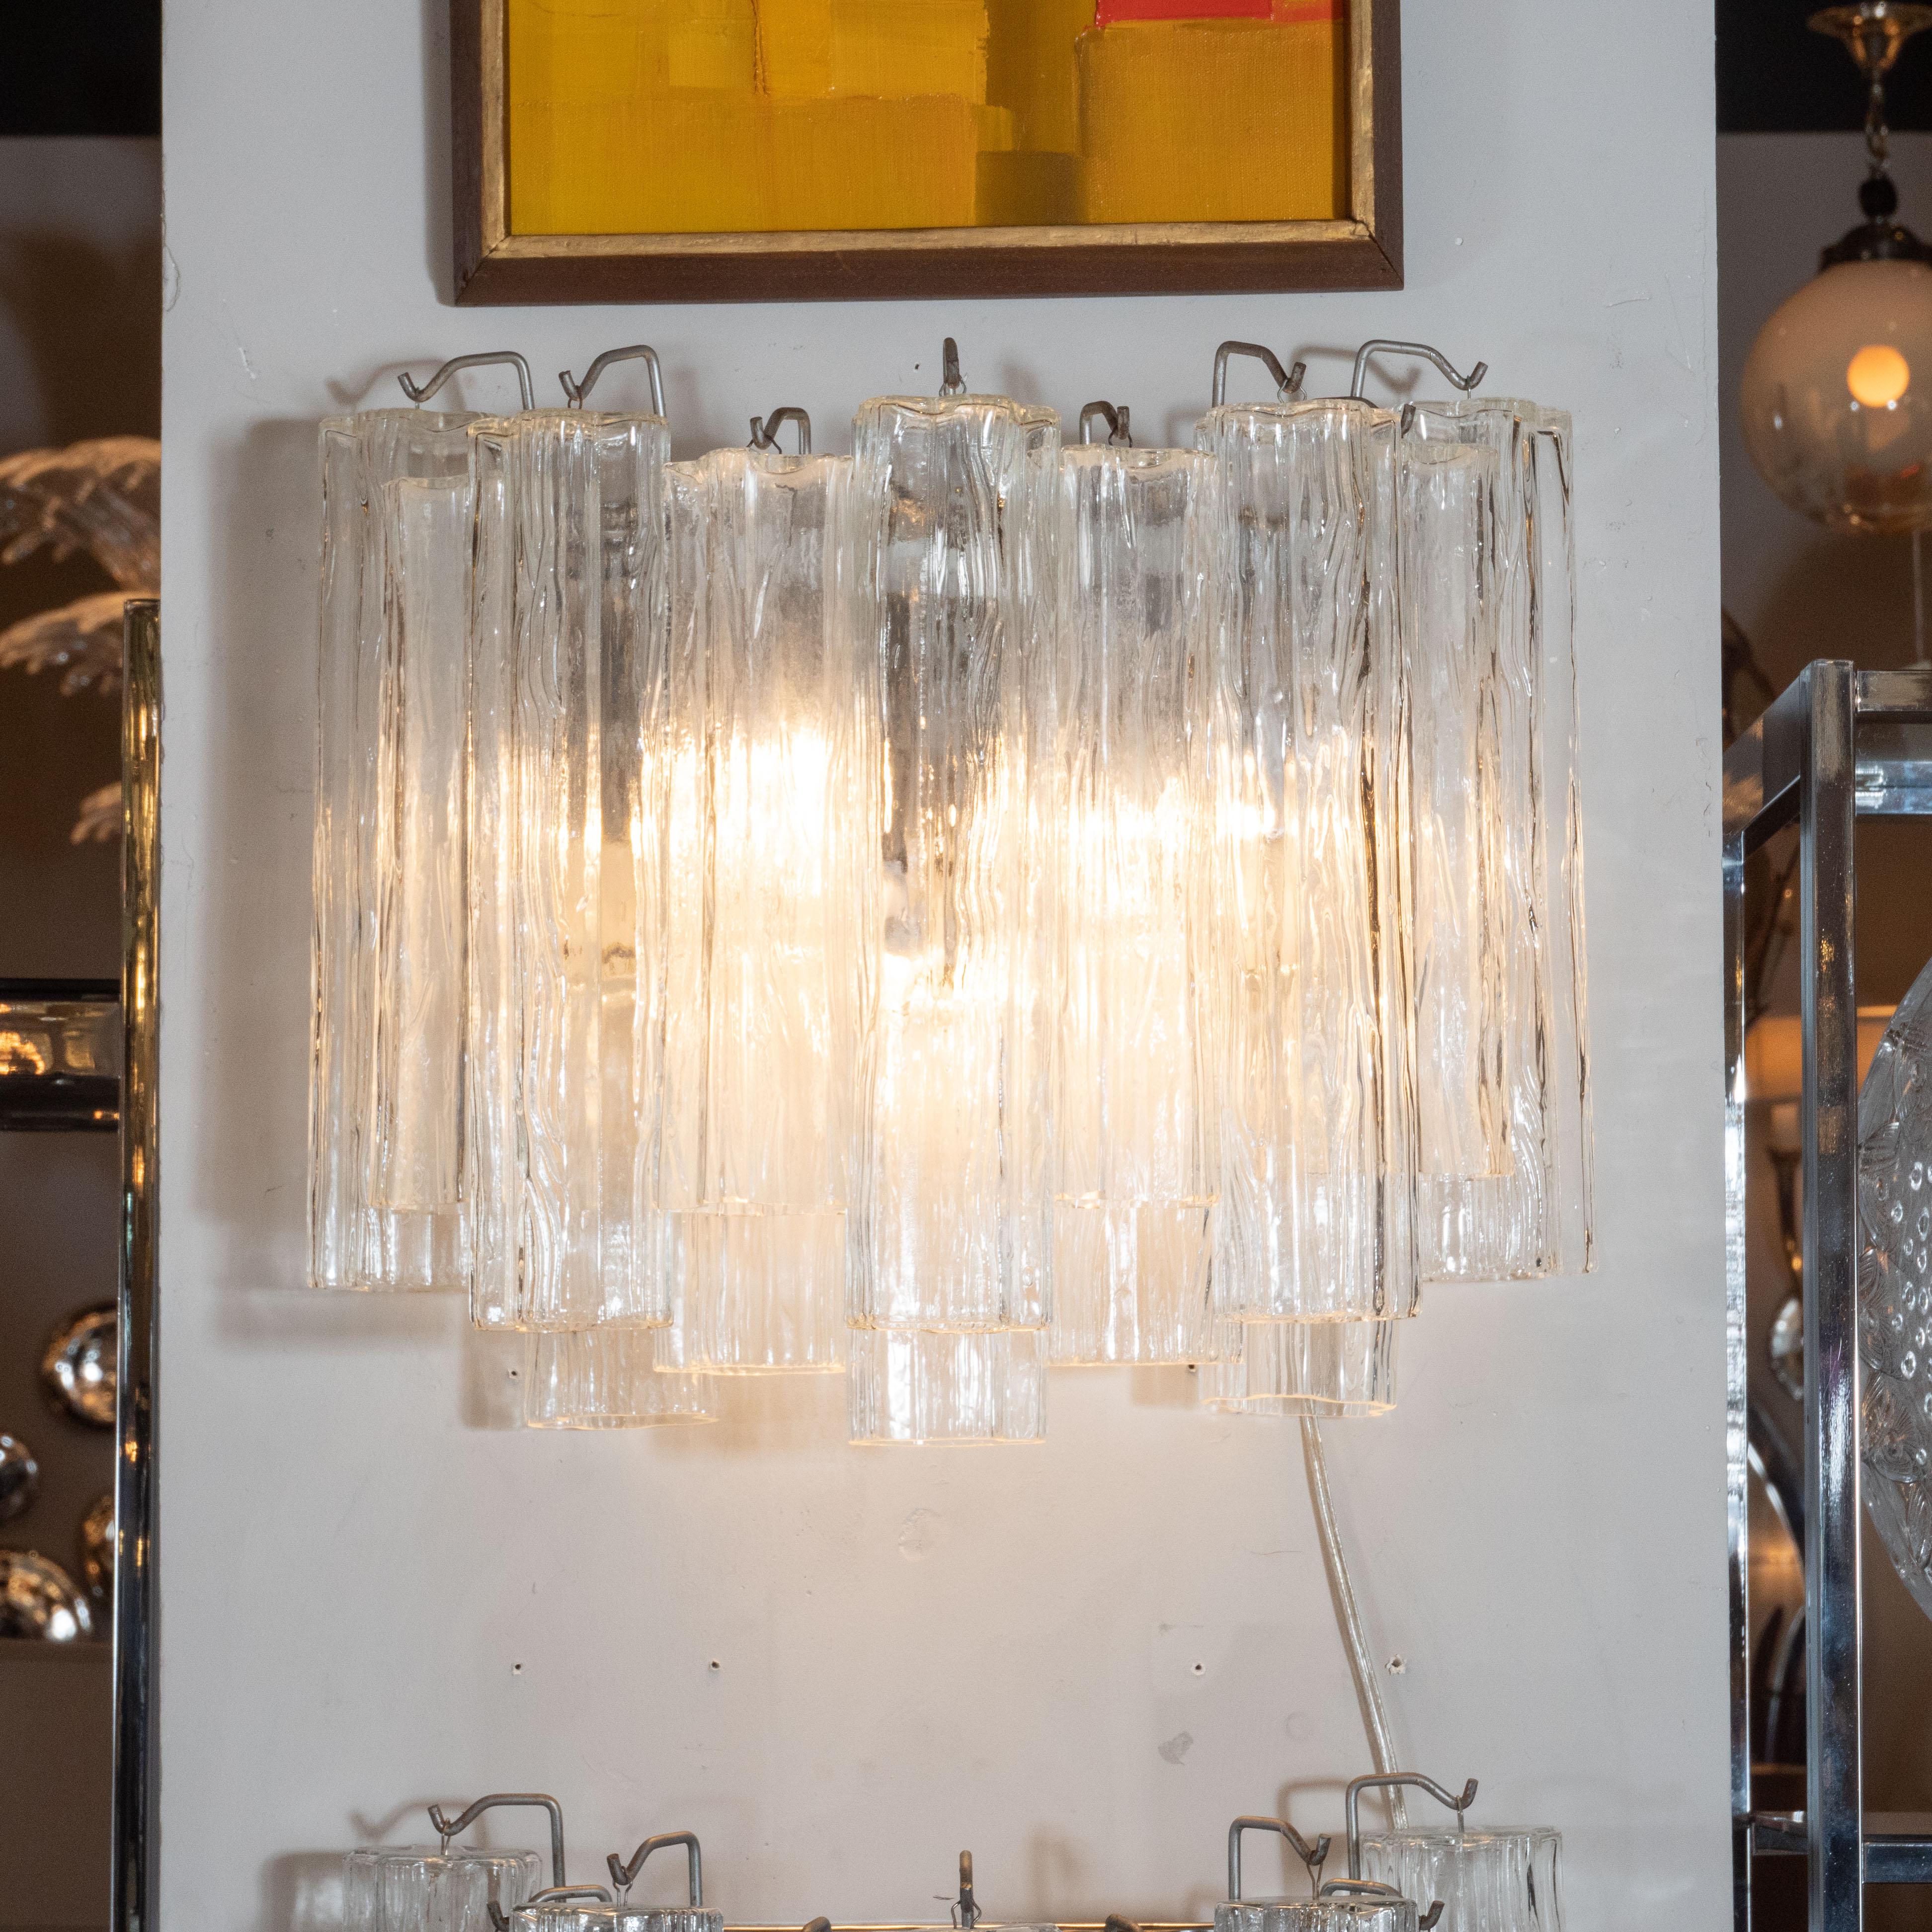 These refined tronchi sconces were handblown in Murano, Italy, circa 1970. They feature an abundance of tronchi glass crystals suspended from a nickel frame in a staggered arrangement. The light refracts beautifully through the glass casting any